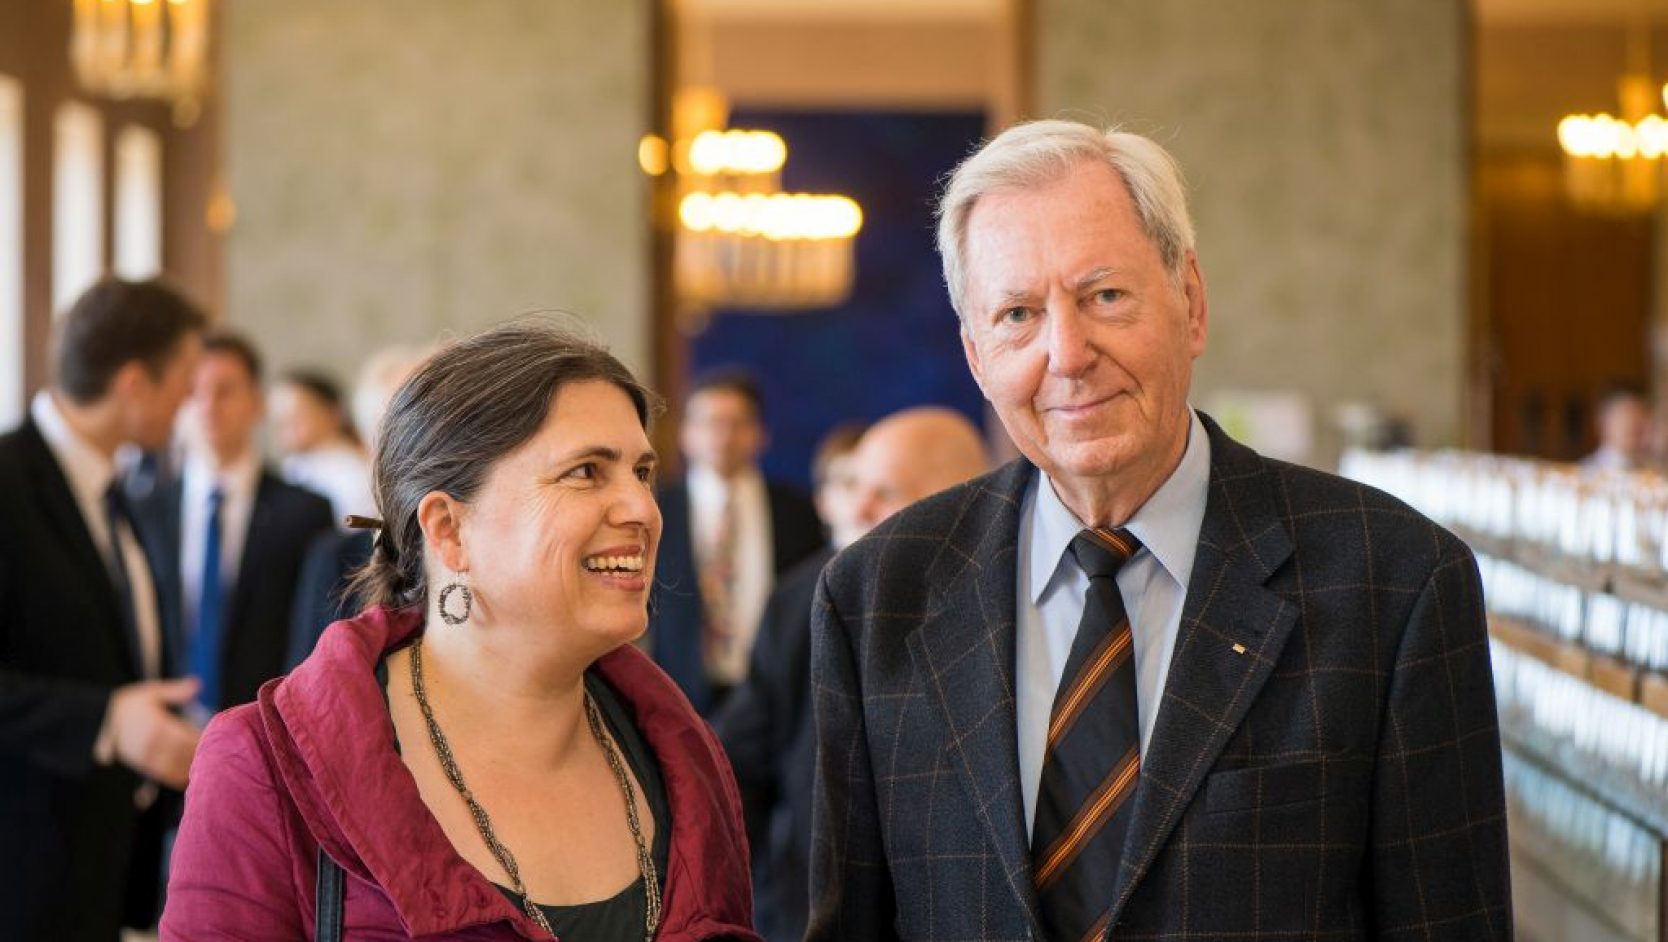 Hanns W. Weidinger with his niece Katrin Lehr at the Münchner Residenz during the great festive event of TUM to celebrate the 150-year anniversary (Photo: Astrid Eckert/TUM).